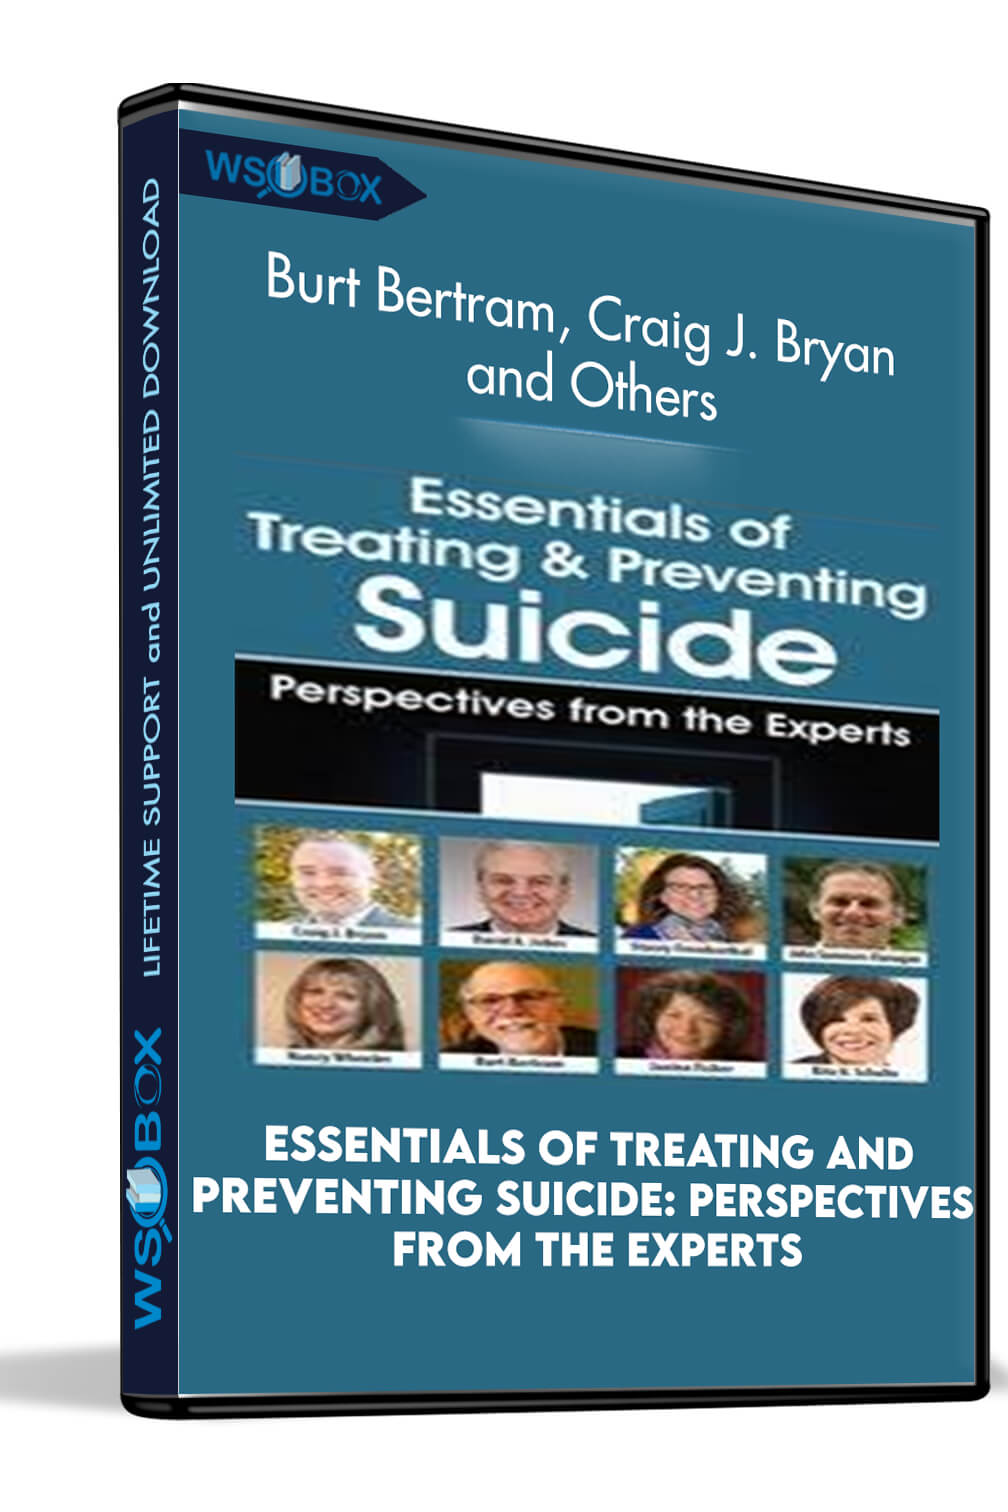 Essentials of Treating and Preventing Suicide: Perspectives from the Experts - Burt Bertram, Craig J. Bryan and Others